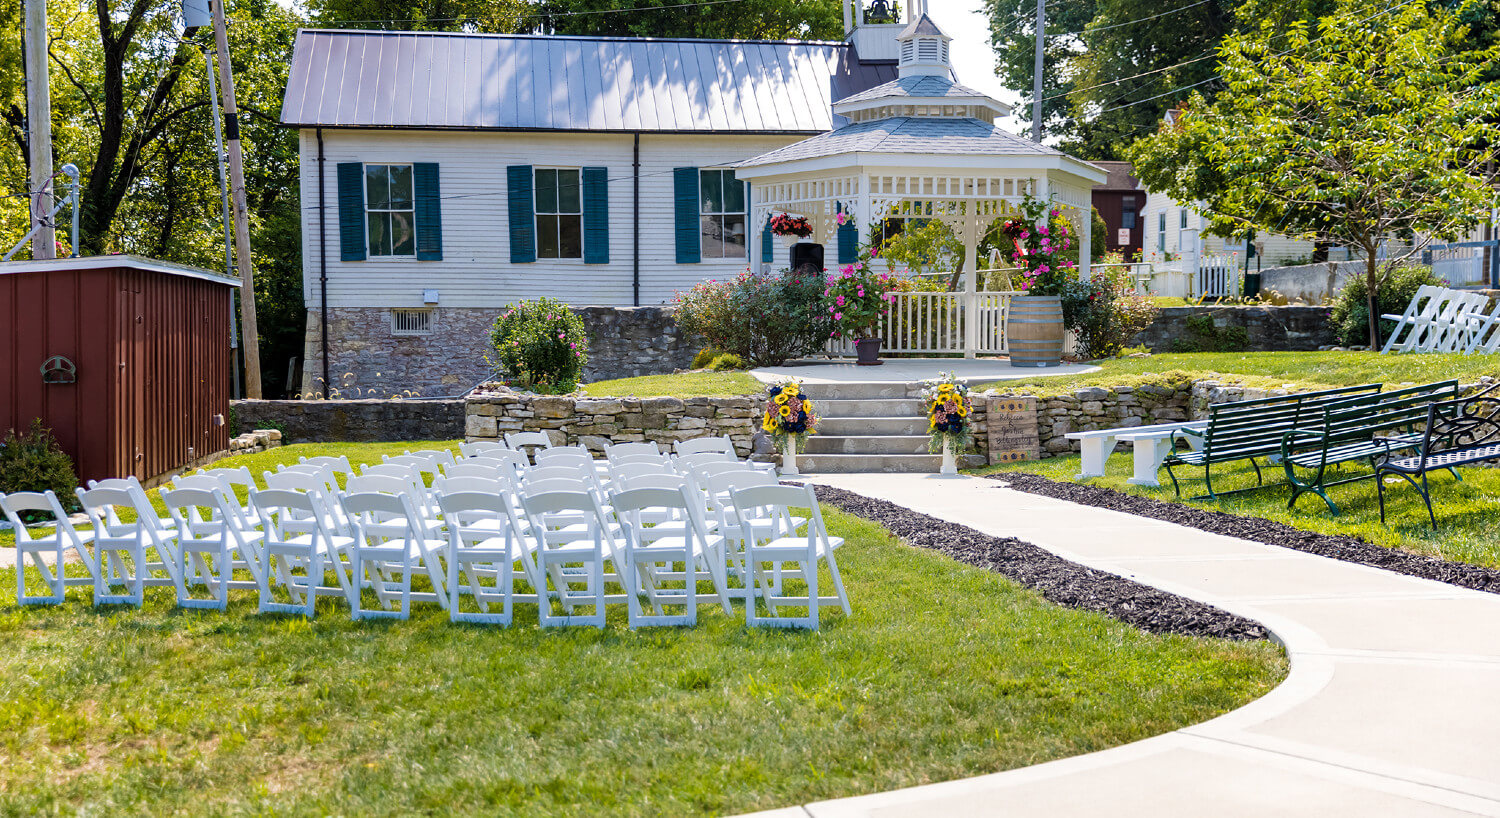 Lawn setup with white folding chairs and benches on each side of cement walk facing white gazebo with hanging potted plants and vases with sunflowers.